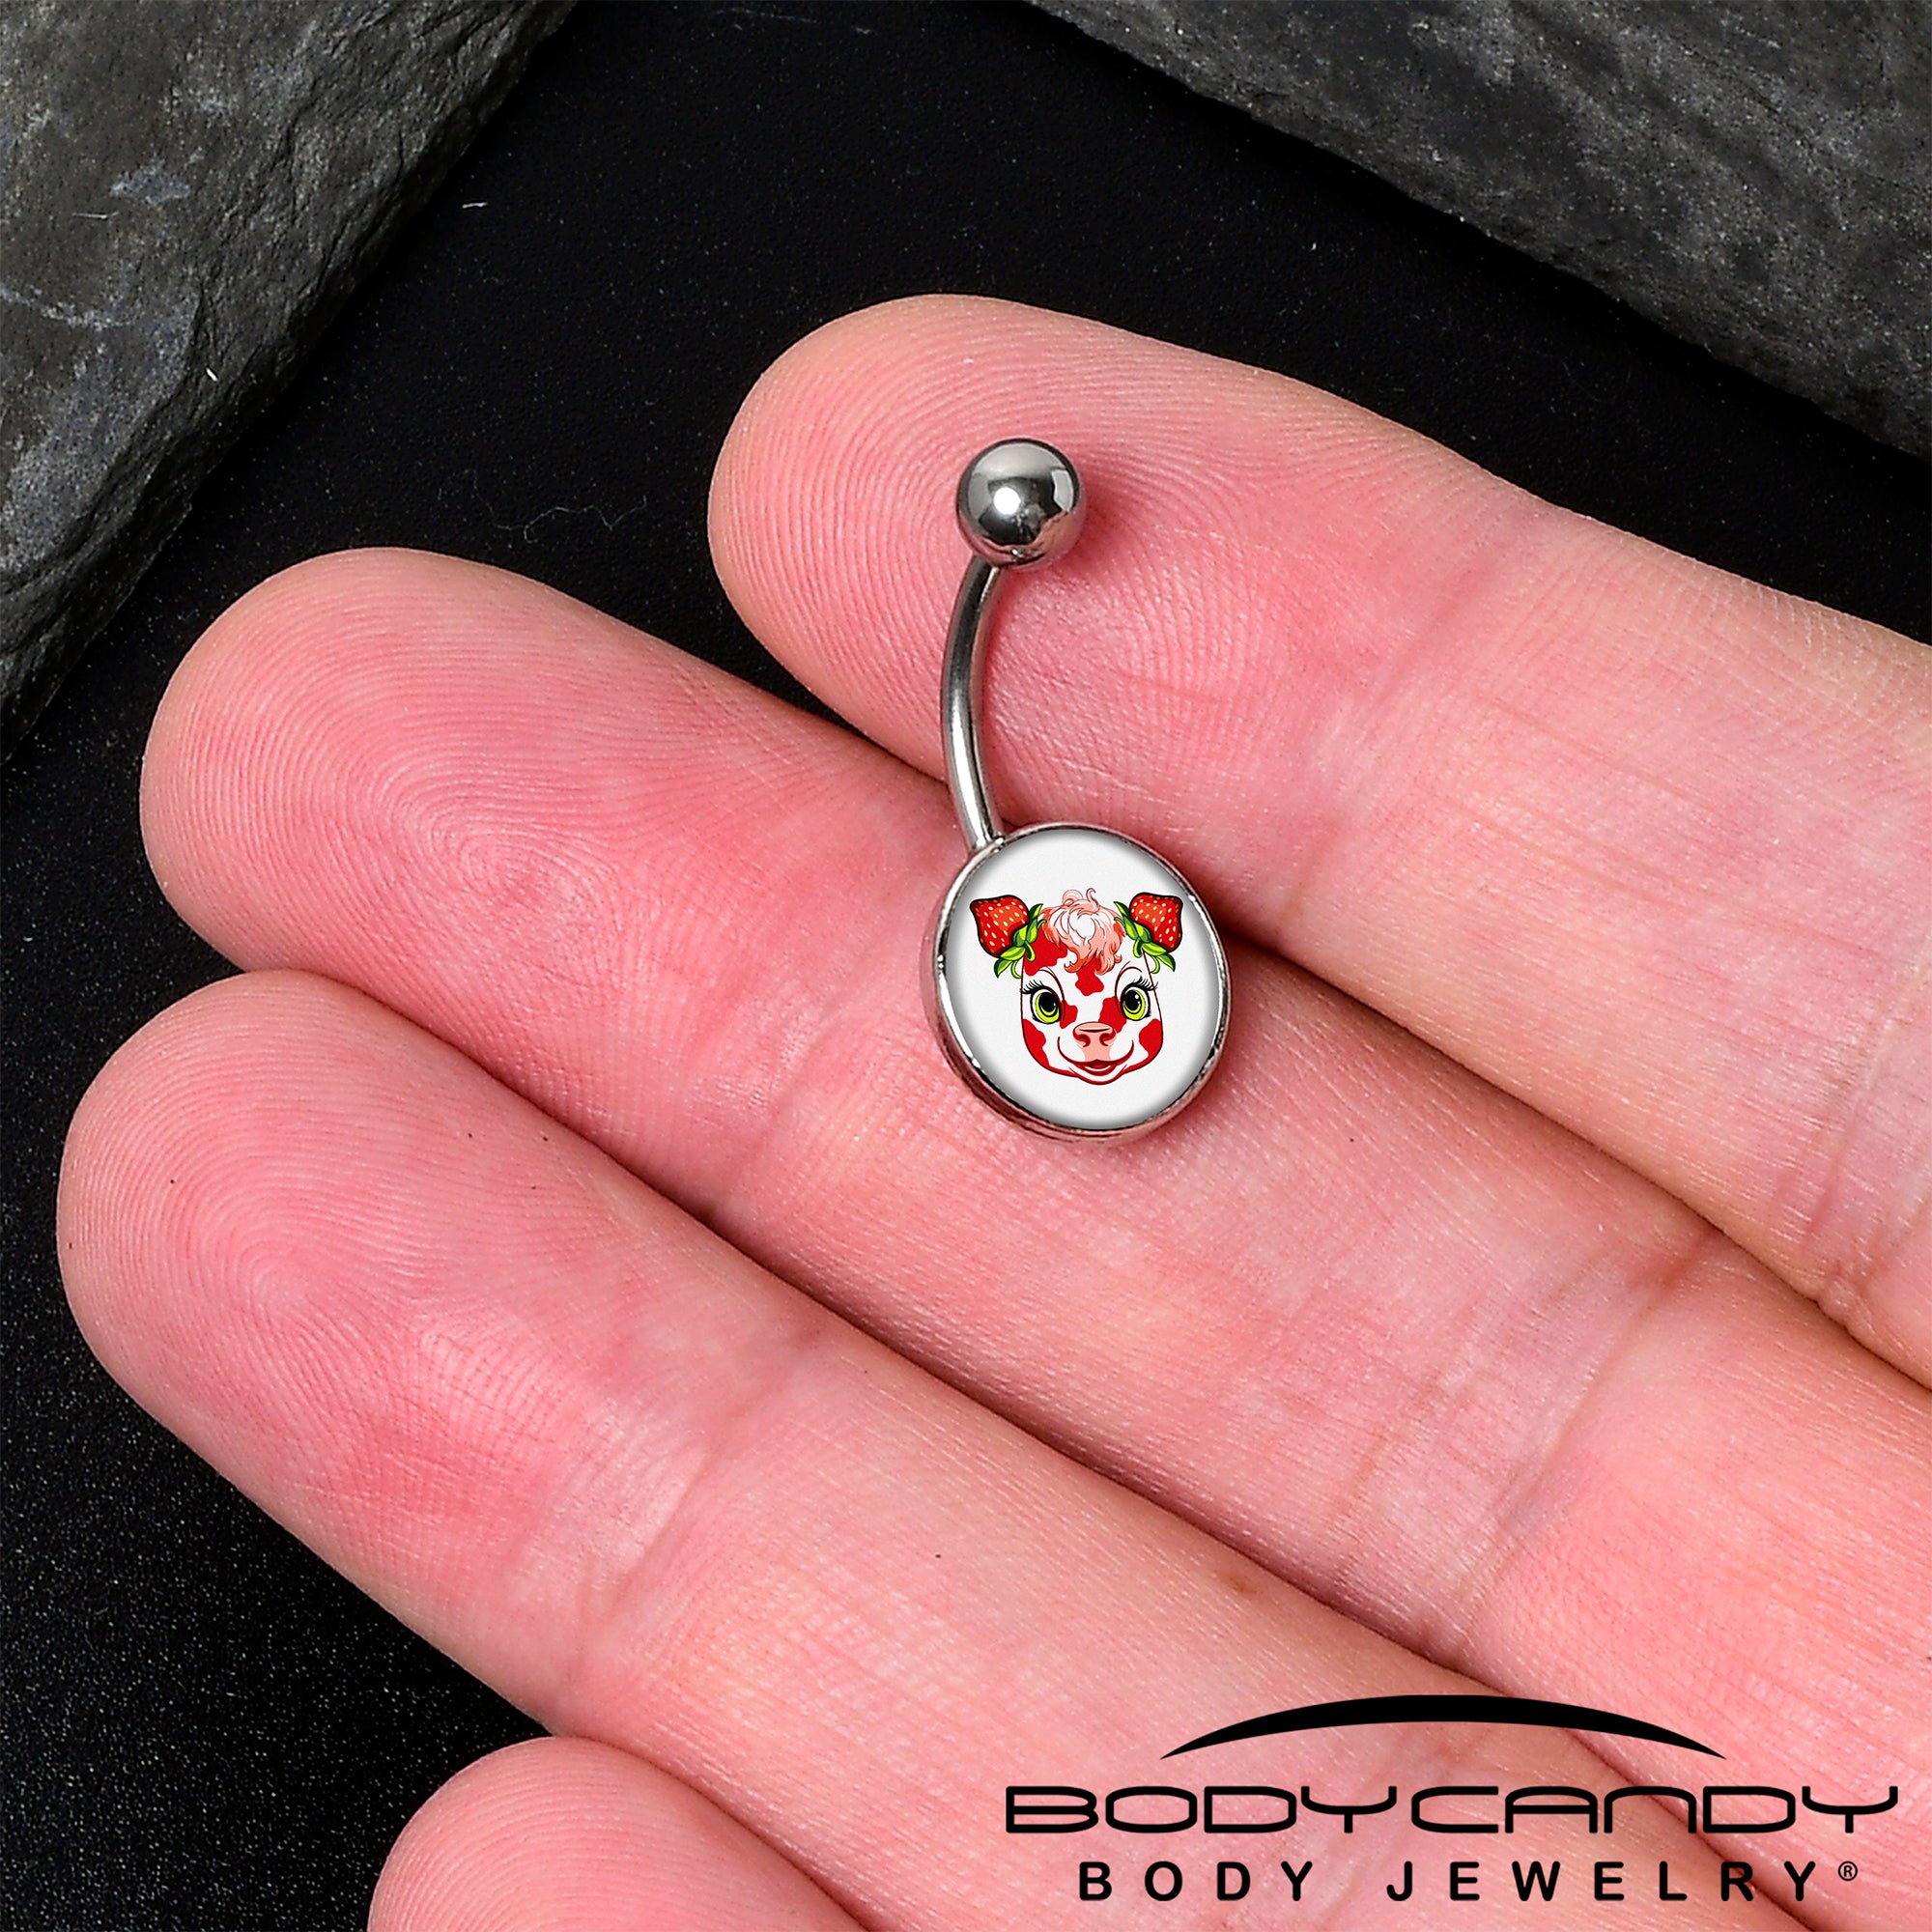 Stawberry Cow Belly Ring